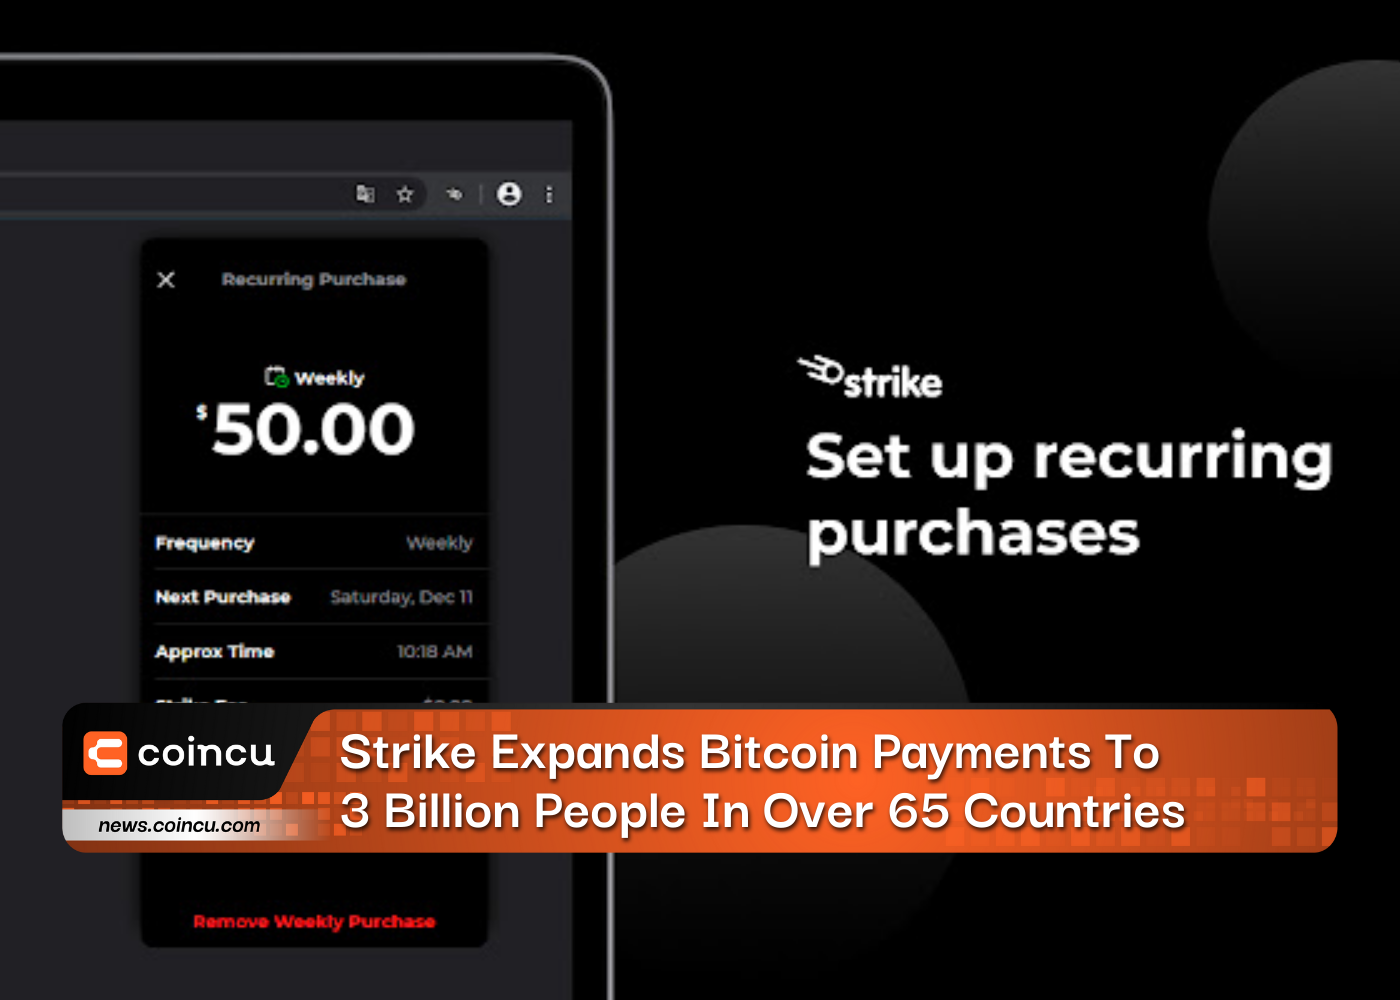 Strike Expands Bitcoin Payments To 3 Billion People In Over 65 Countries